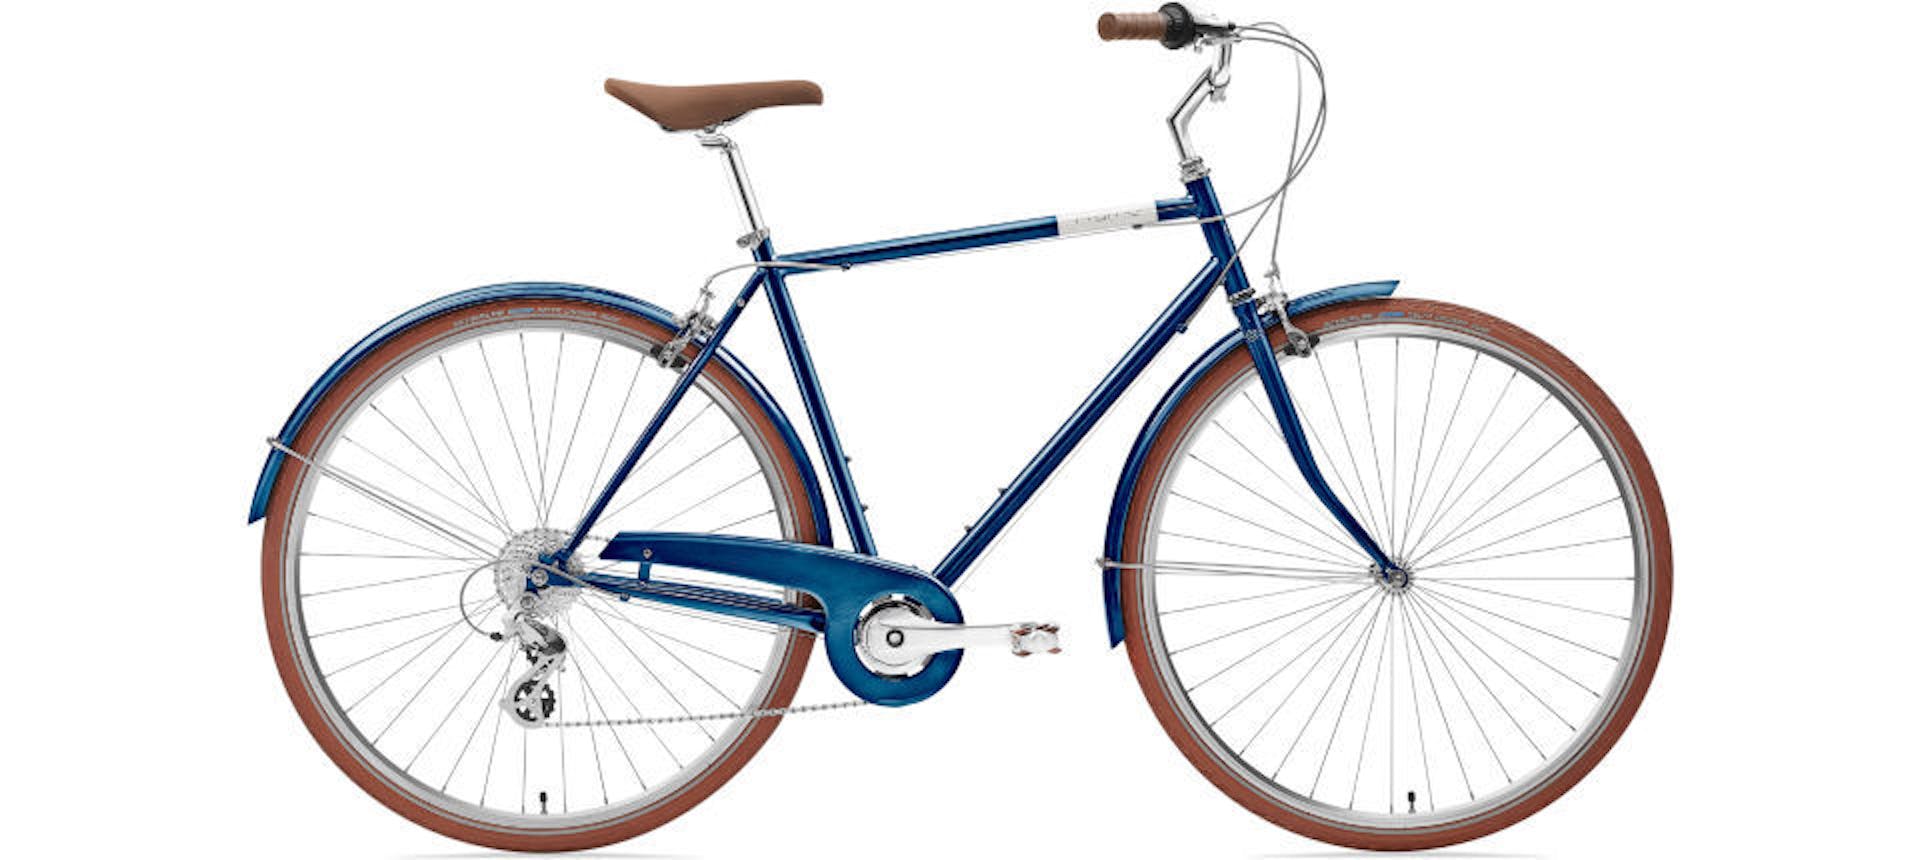 Creme cycles mike uno 7 speed deep blue 2019